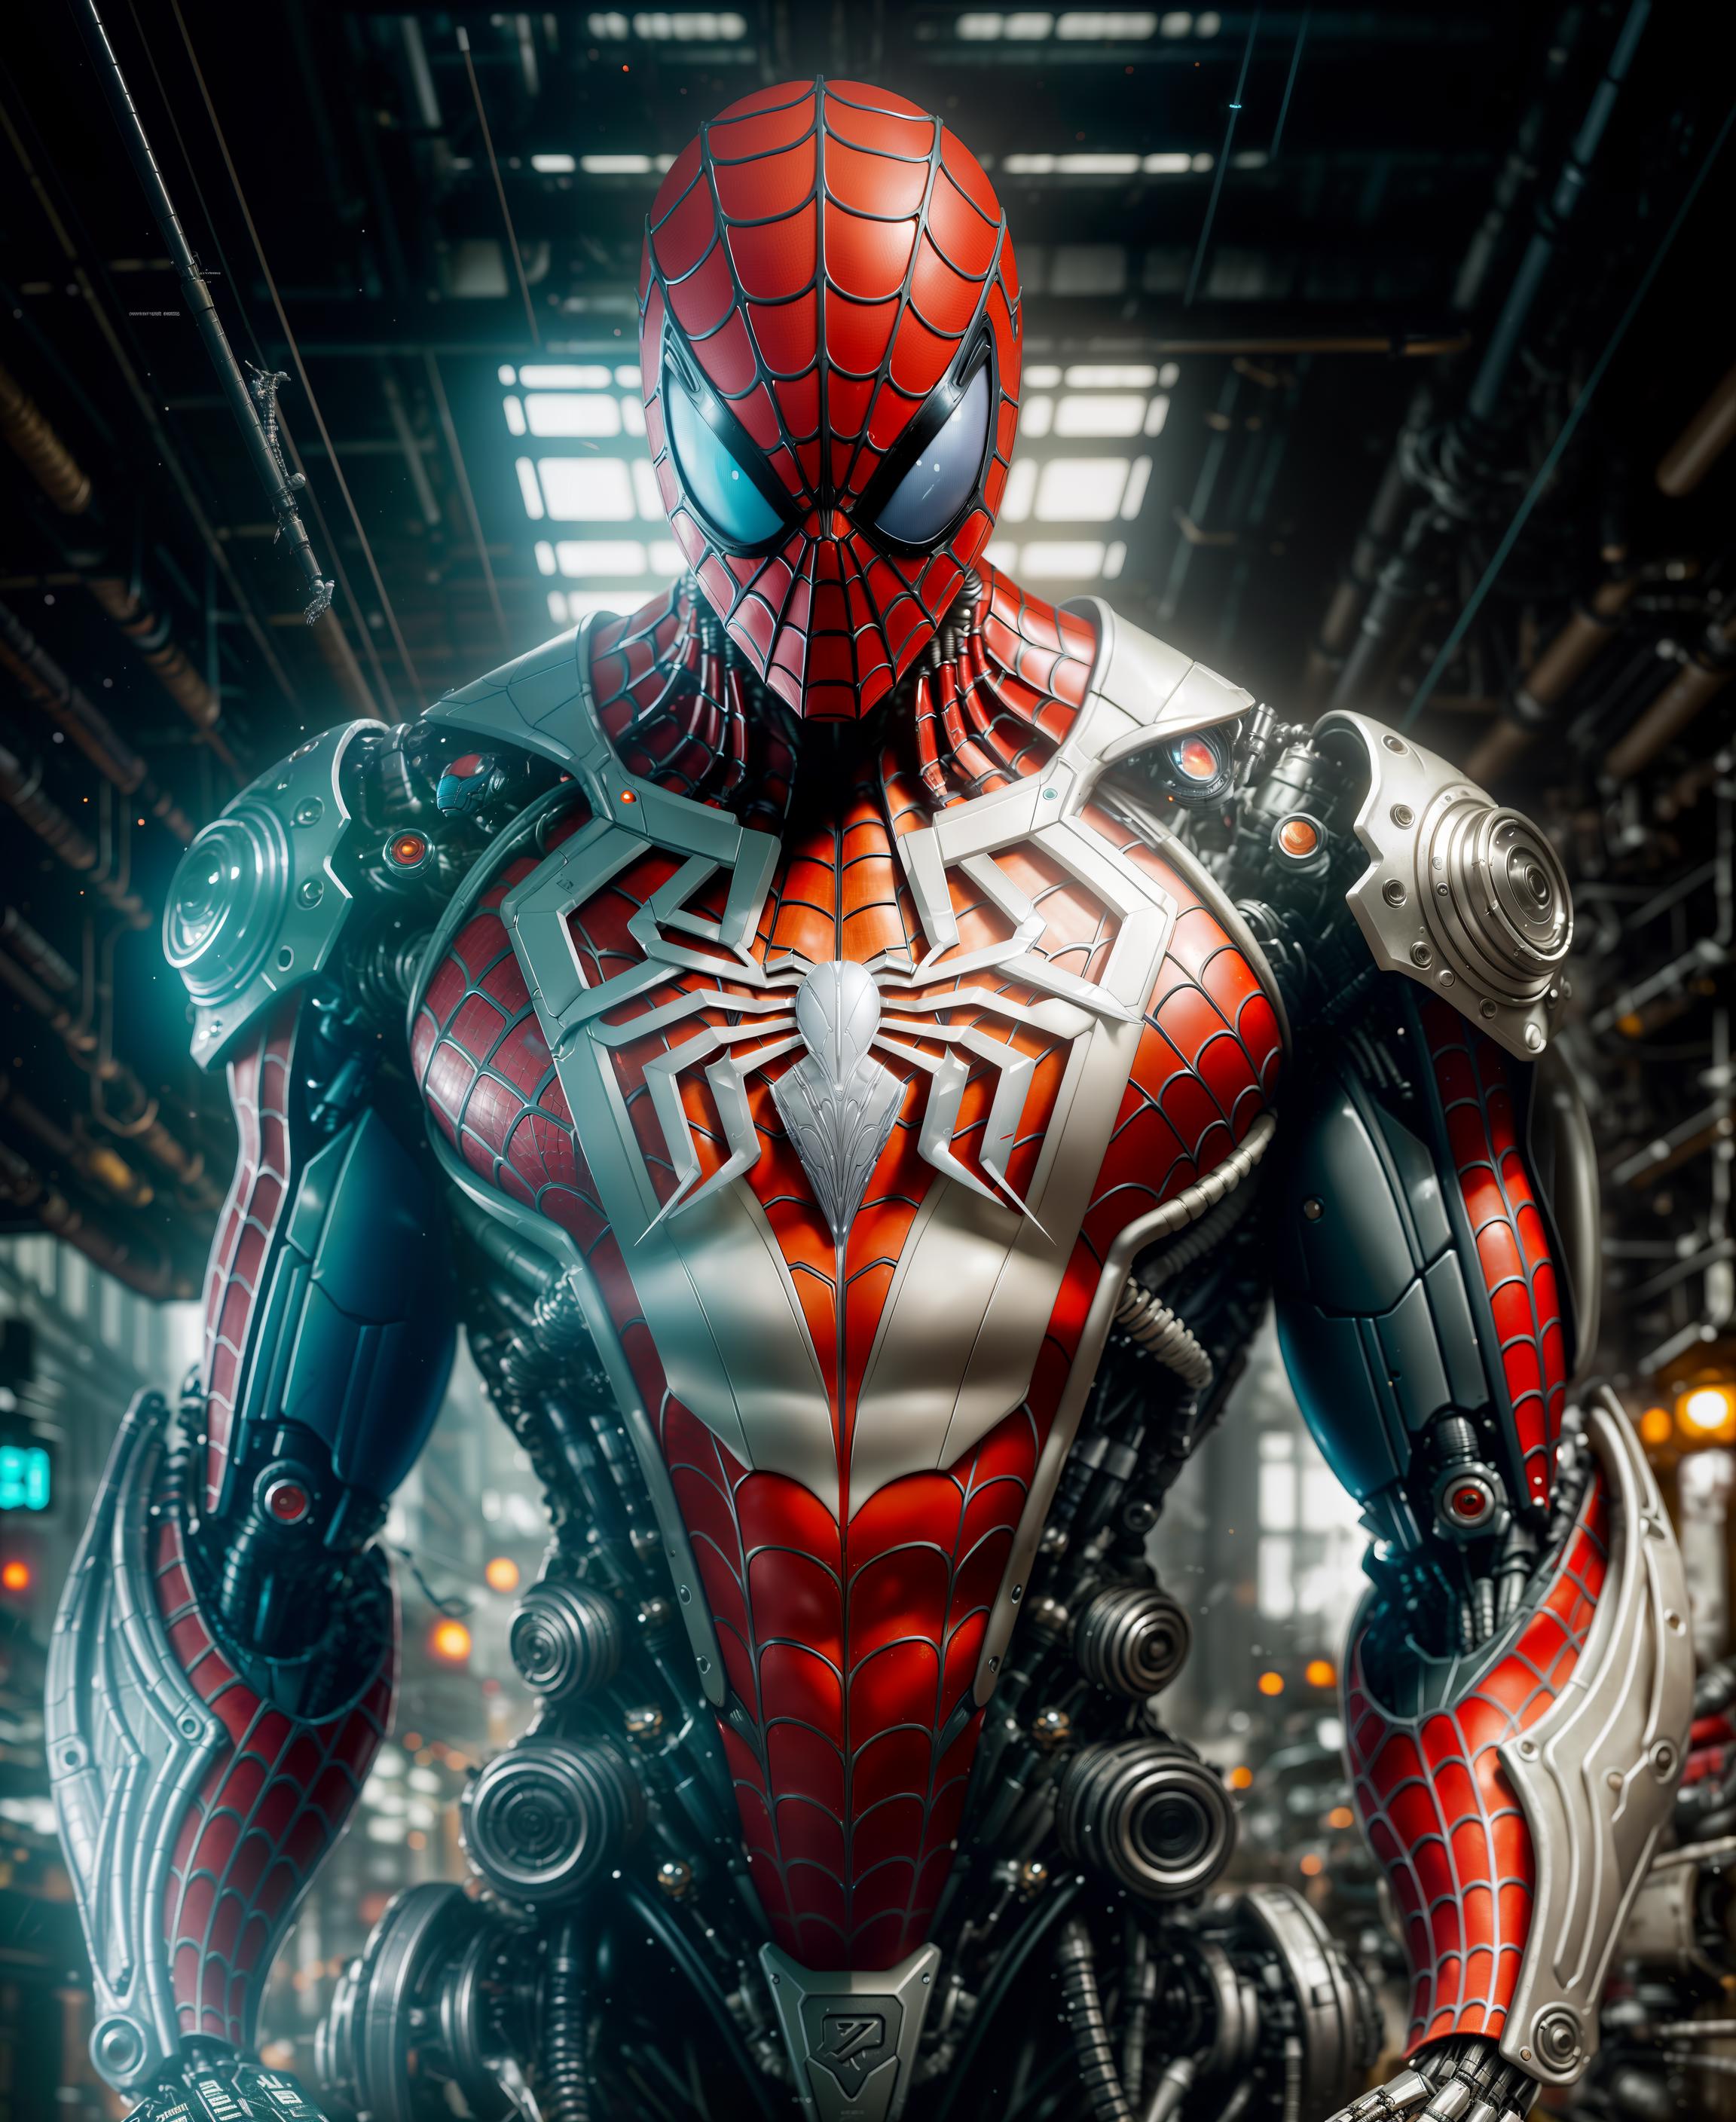 A Spiderman suit with red and white colors and a metallic texture.